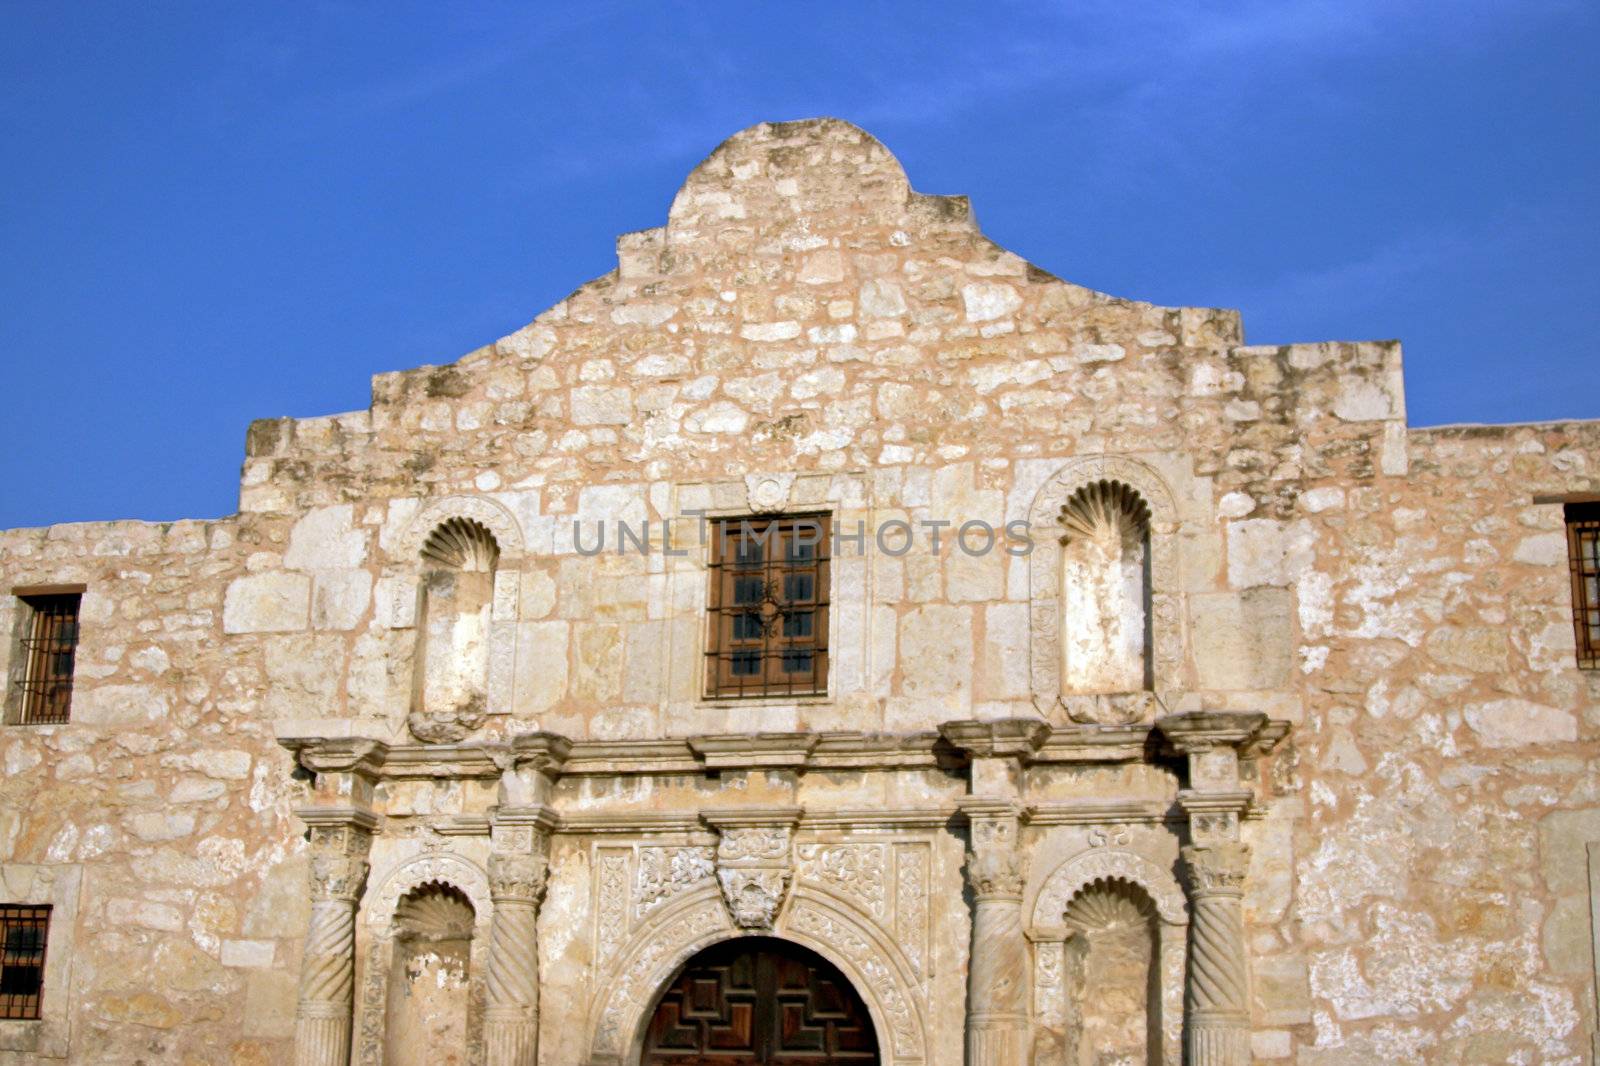 The Alamo located in San Antonio, Texas was the location of the great last stand by some of the biggest Texas Heroes.